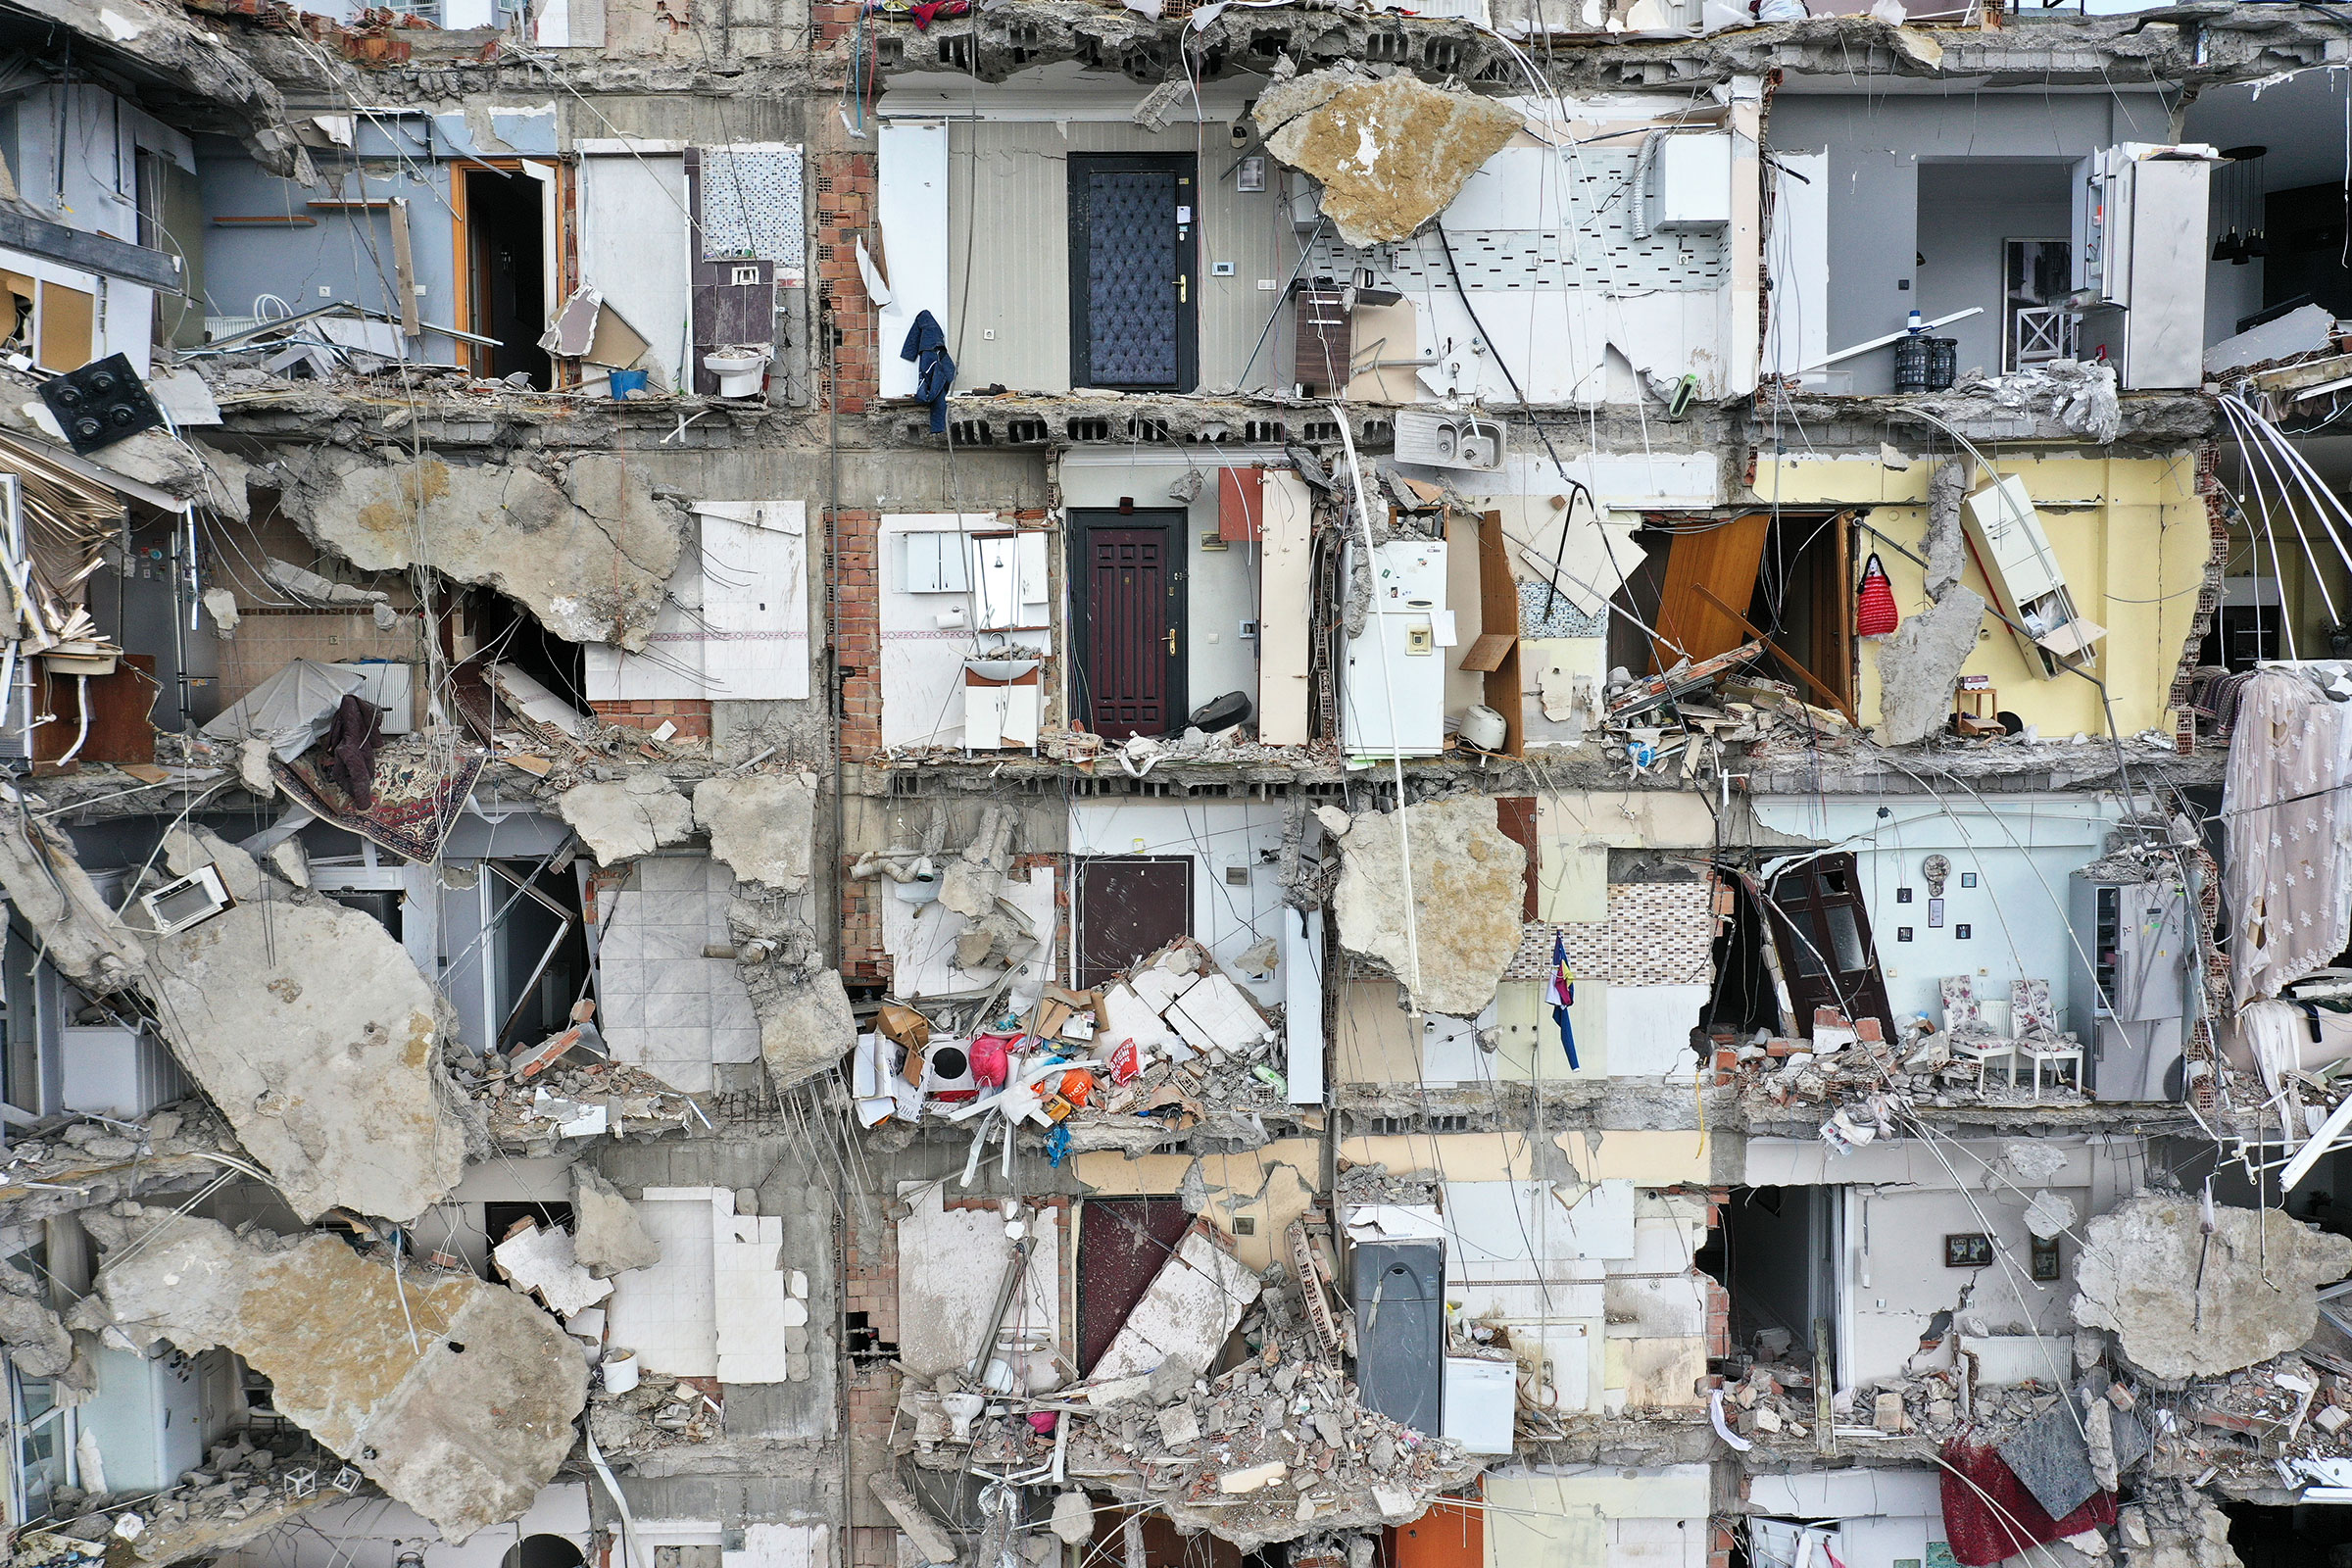 An aerial view of a damaged building after an earthquake in Adana, Turkey on Feb. 06, 2023. (Oguz Yeter—Anadolu Agency/Getty Images)